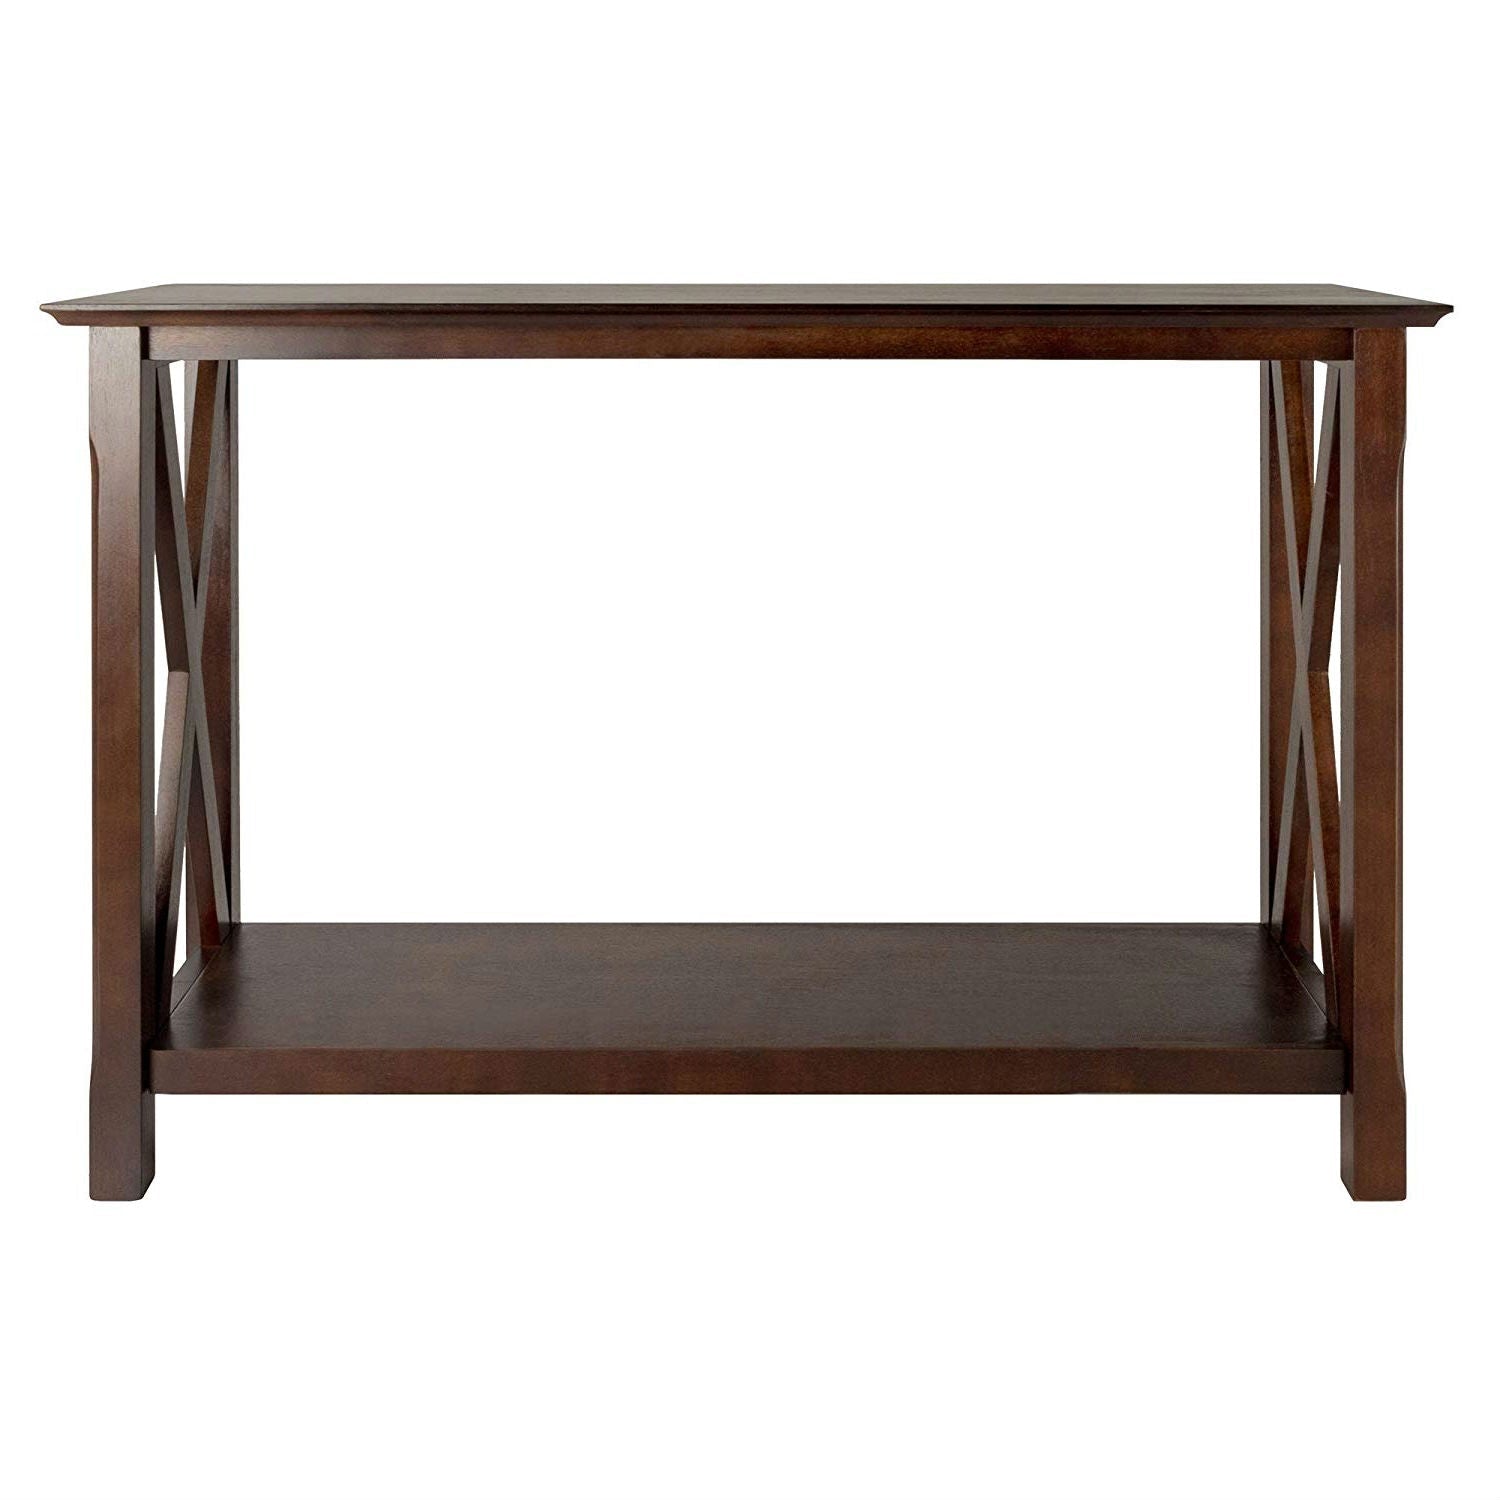 Living Room > Console & Sofa Tables - Cappuccino Brown Wood Console Sofa Table With Bottom Shelf